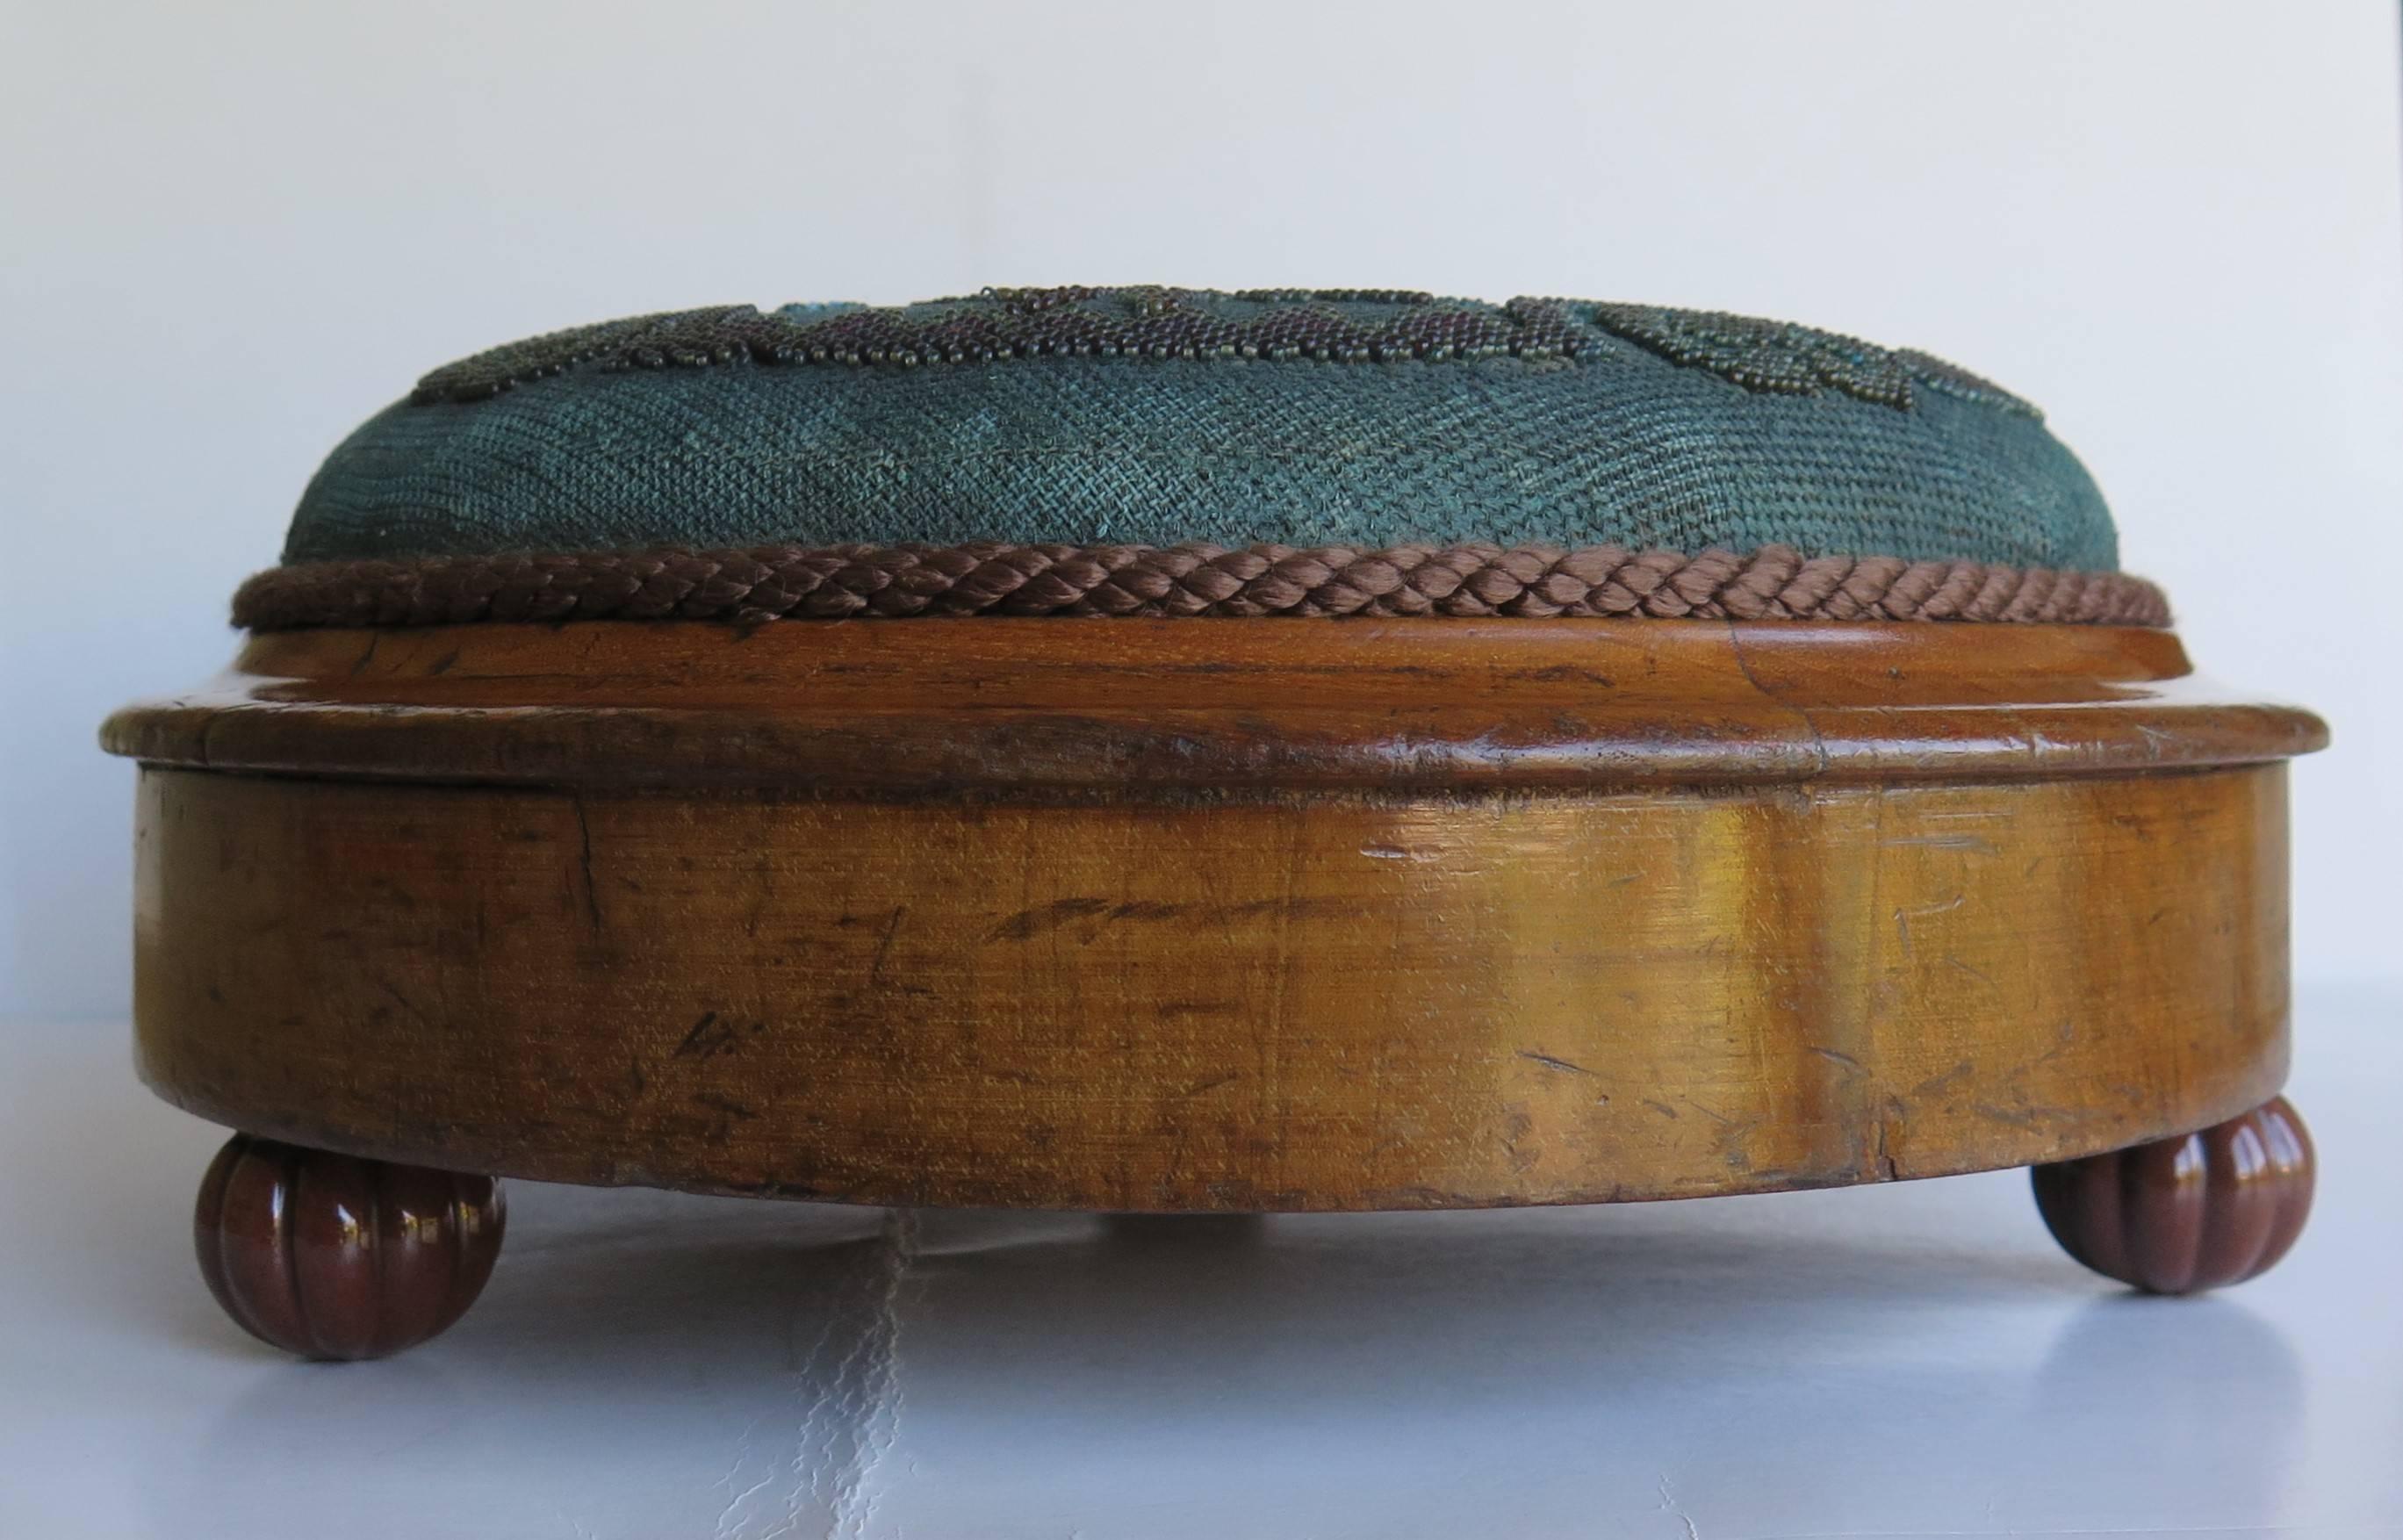 This is a very good example of a beaded English foot stool dating to the mid-19th century of the Victorian period.

The stool is circular with a shaped walnut frame sitting on three fluted ceramic bun feet. The top is upholstered in a teal blue /